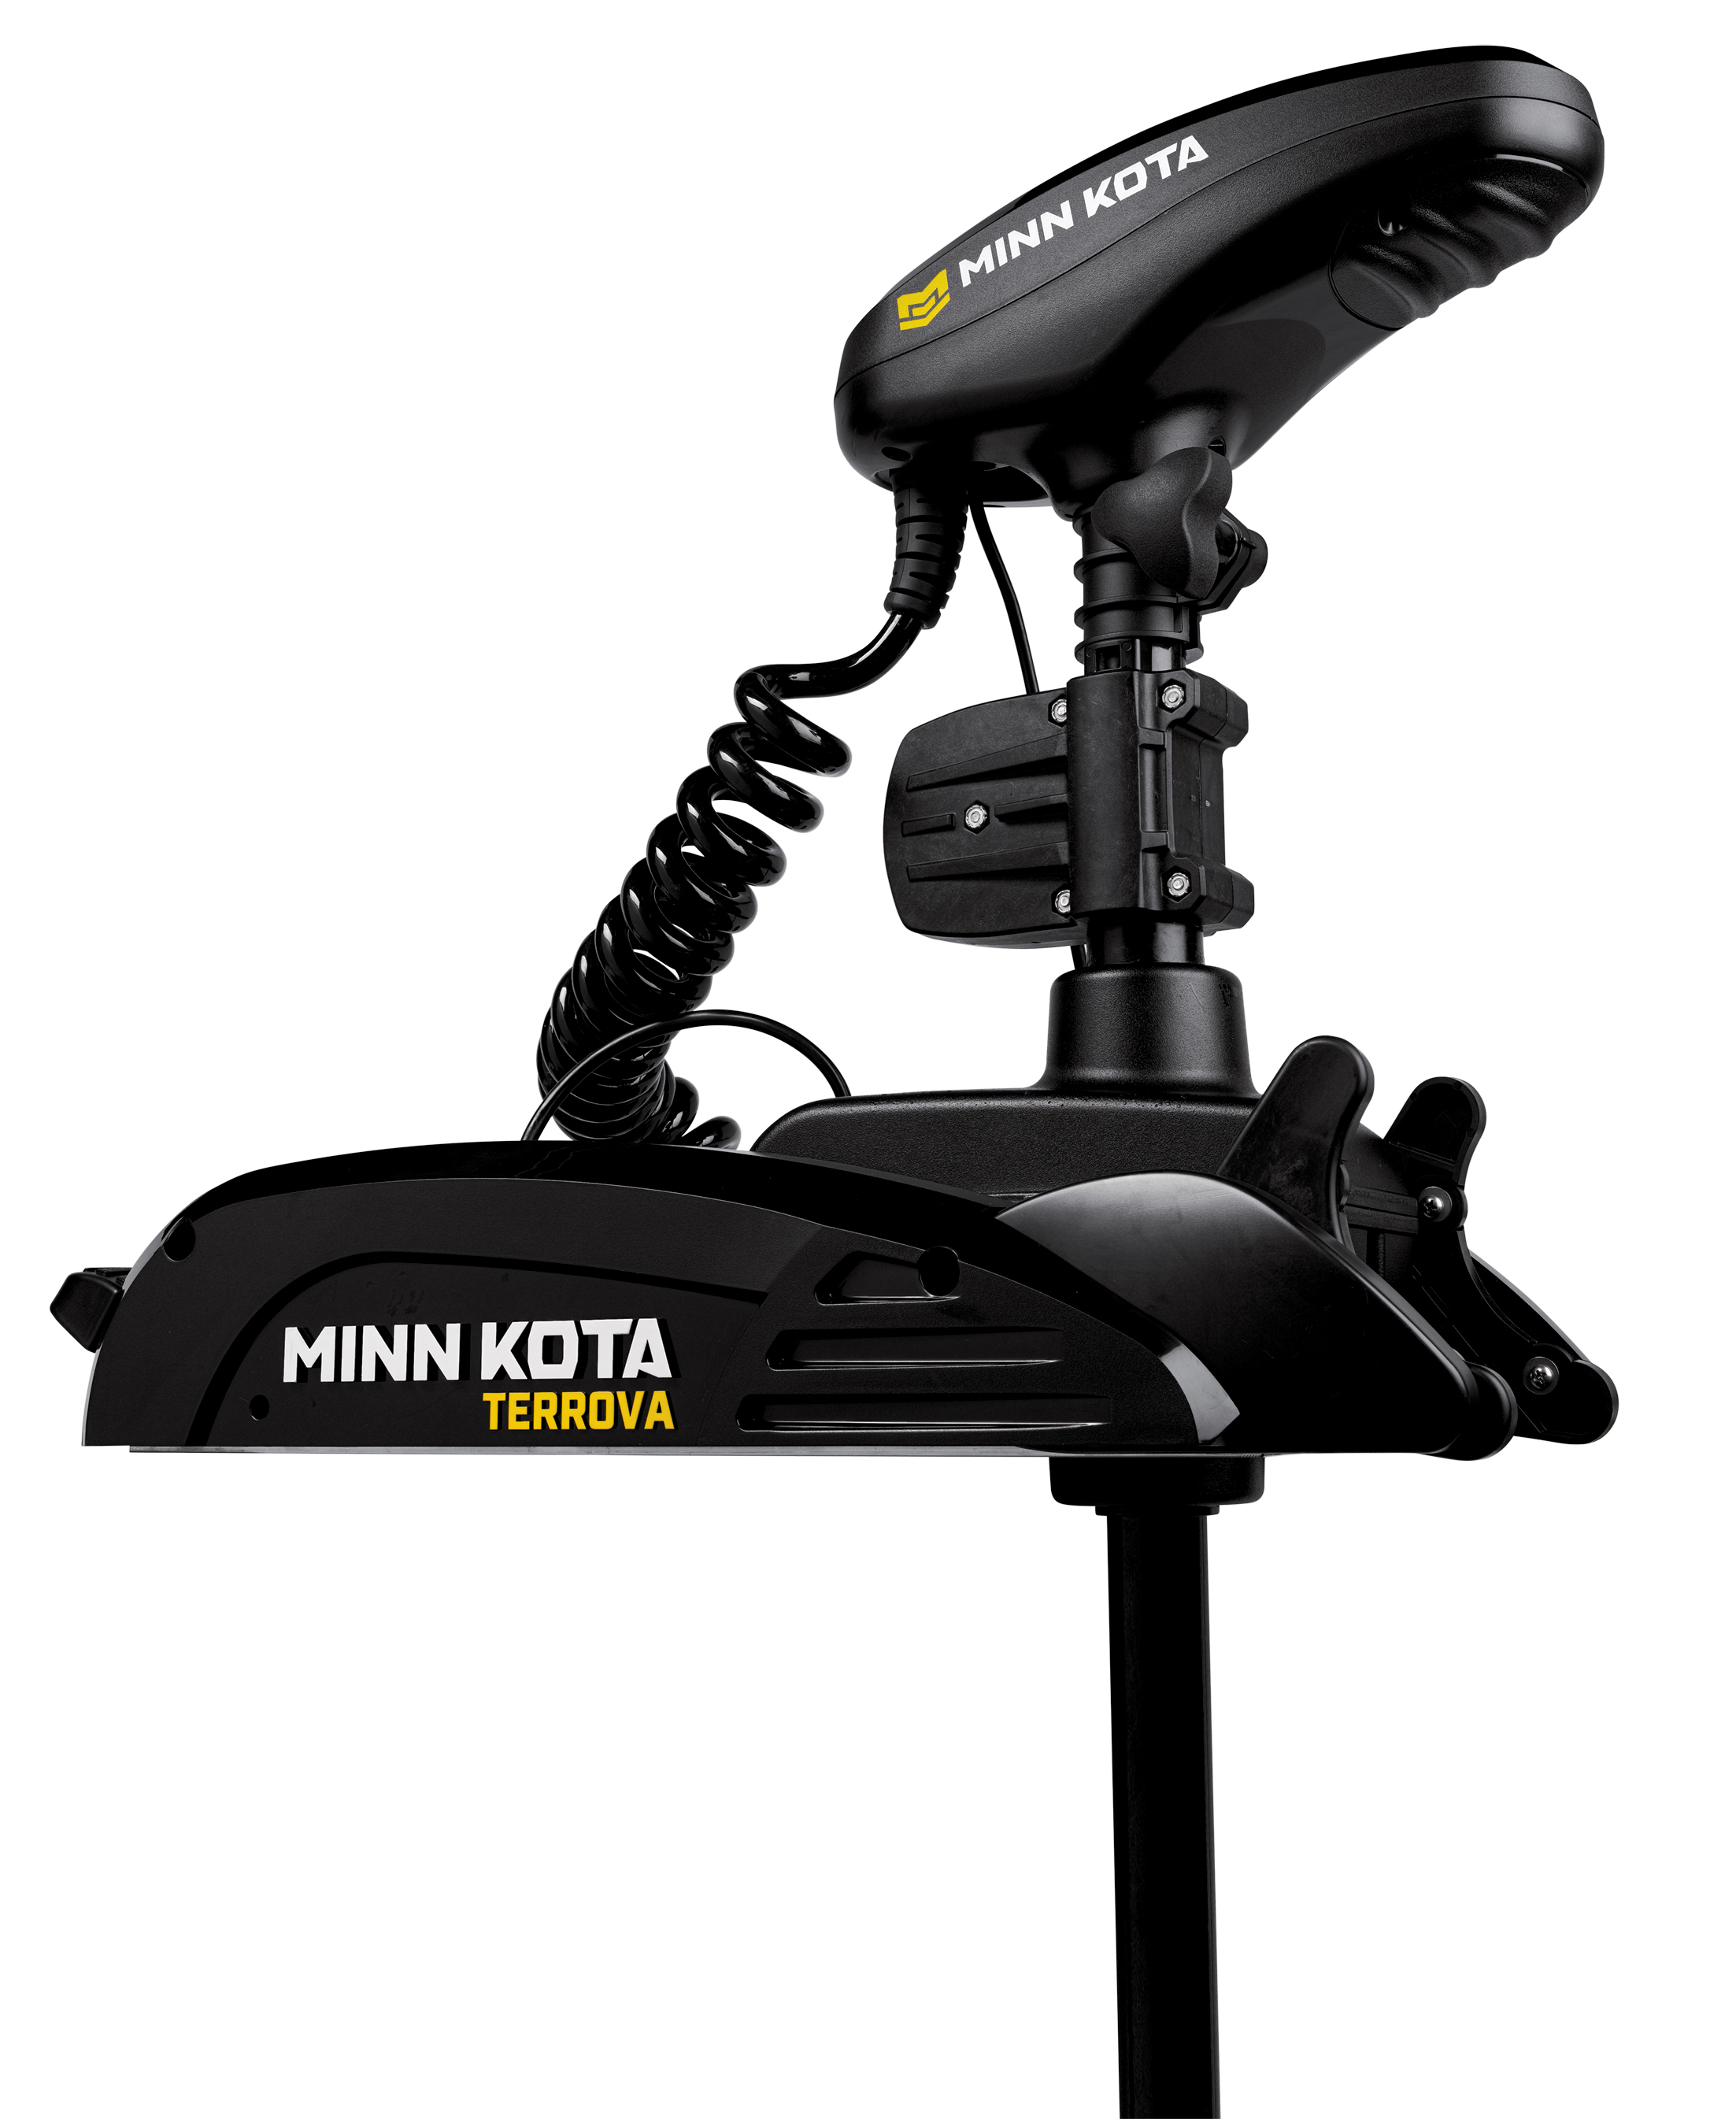 Minn Kota Speed Controllers: The Top 10 Features You Need